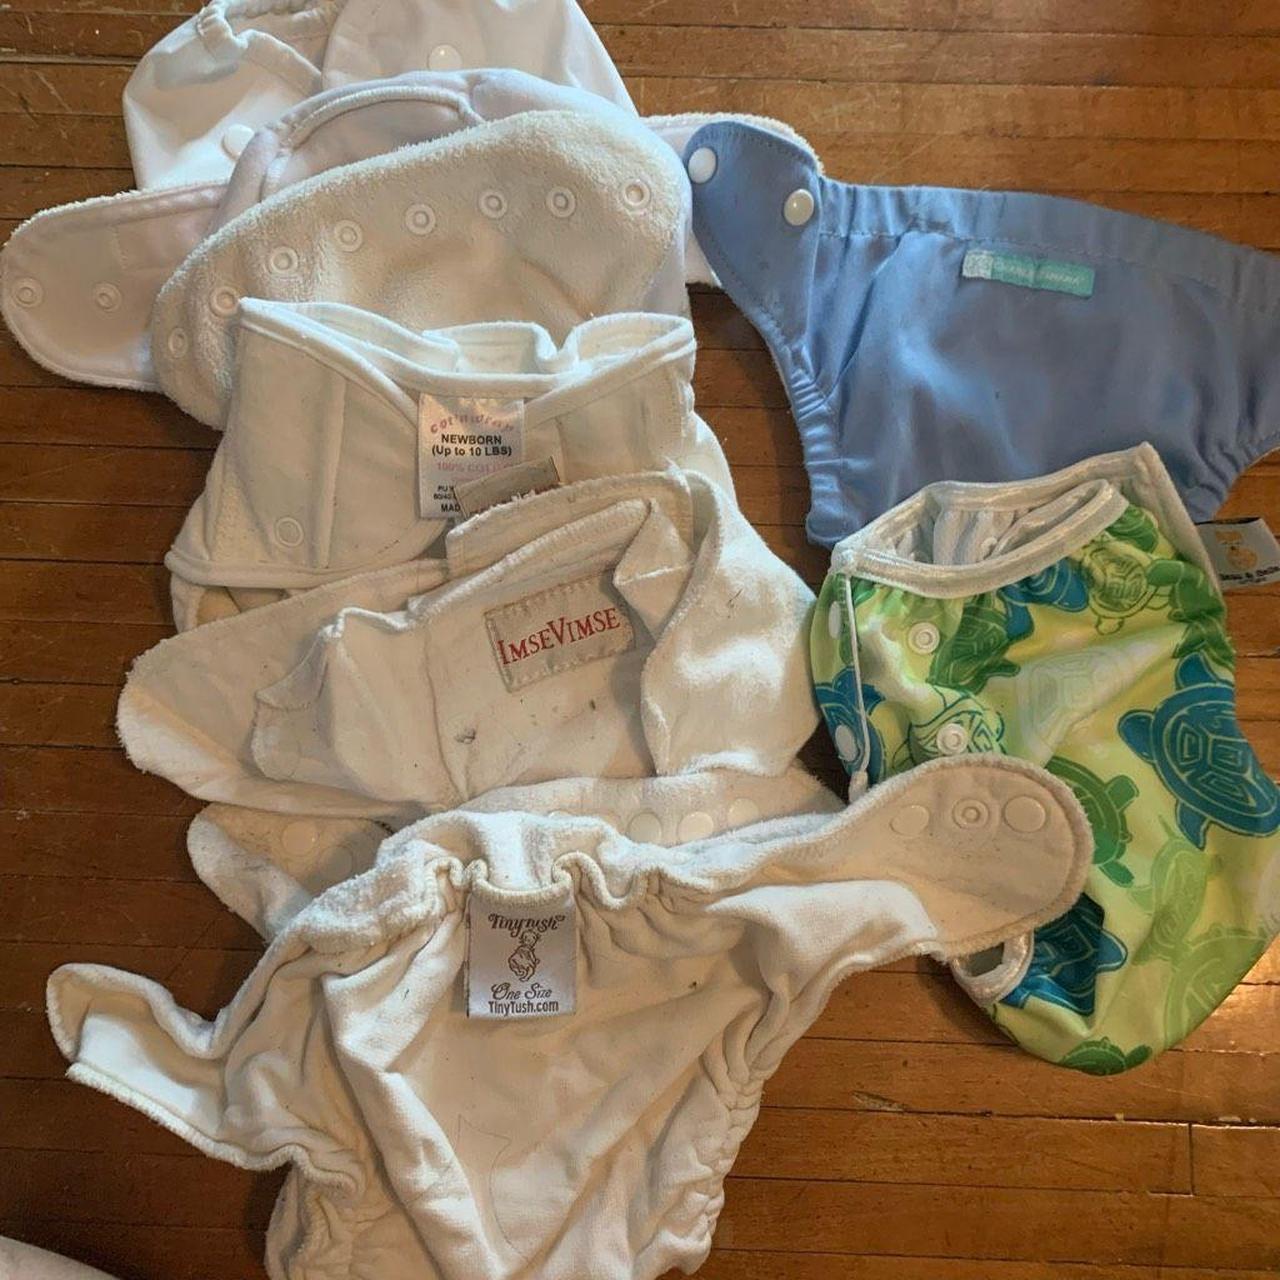 TINY LOOKS washable diaper,plastic diapers for baby reusable,baby